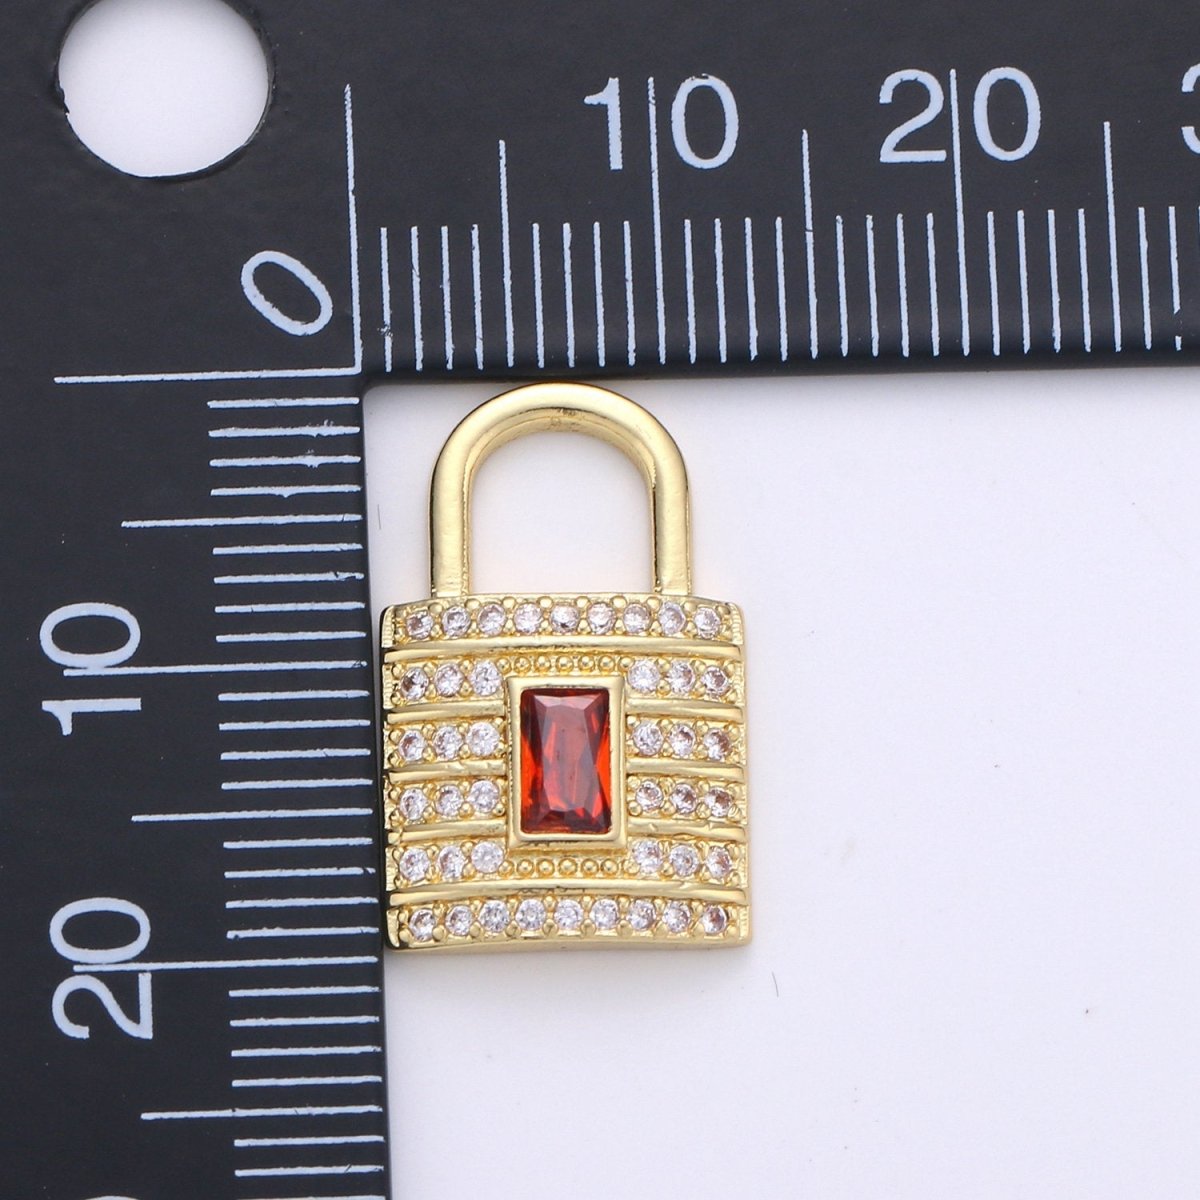 Dainty Gold Micro Pave Lock charm for Jewelry making, Minimalist, Simple Red Padlock charm for Bracelet Necklace Earring Component D-099 - DLUXCA